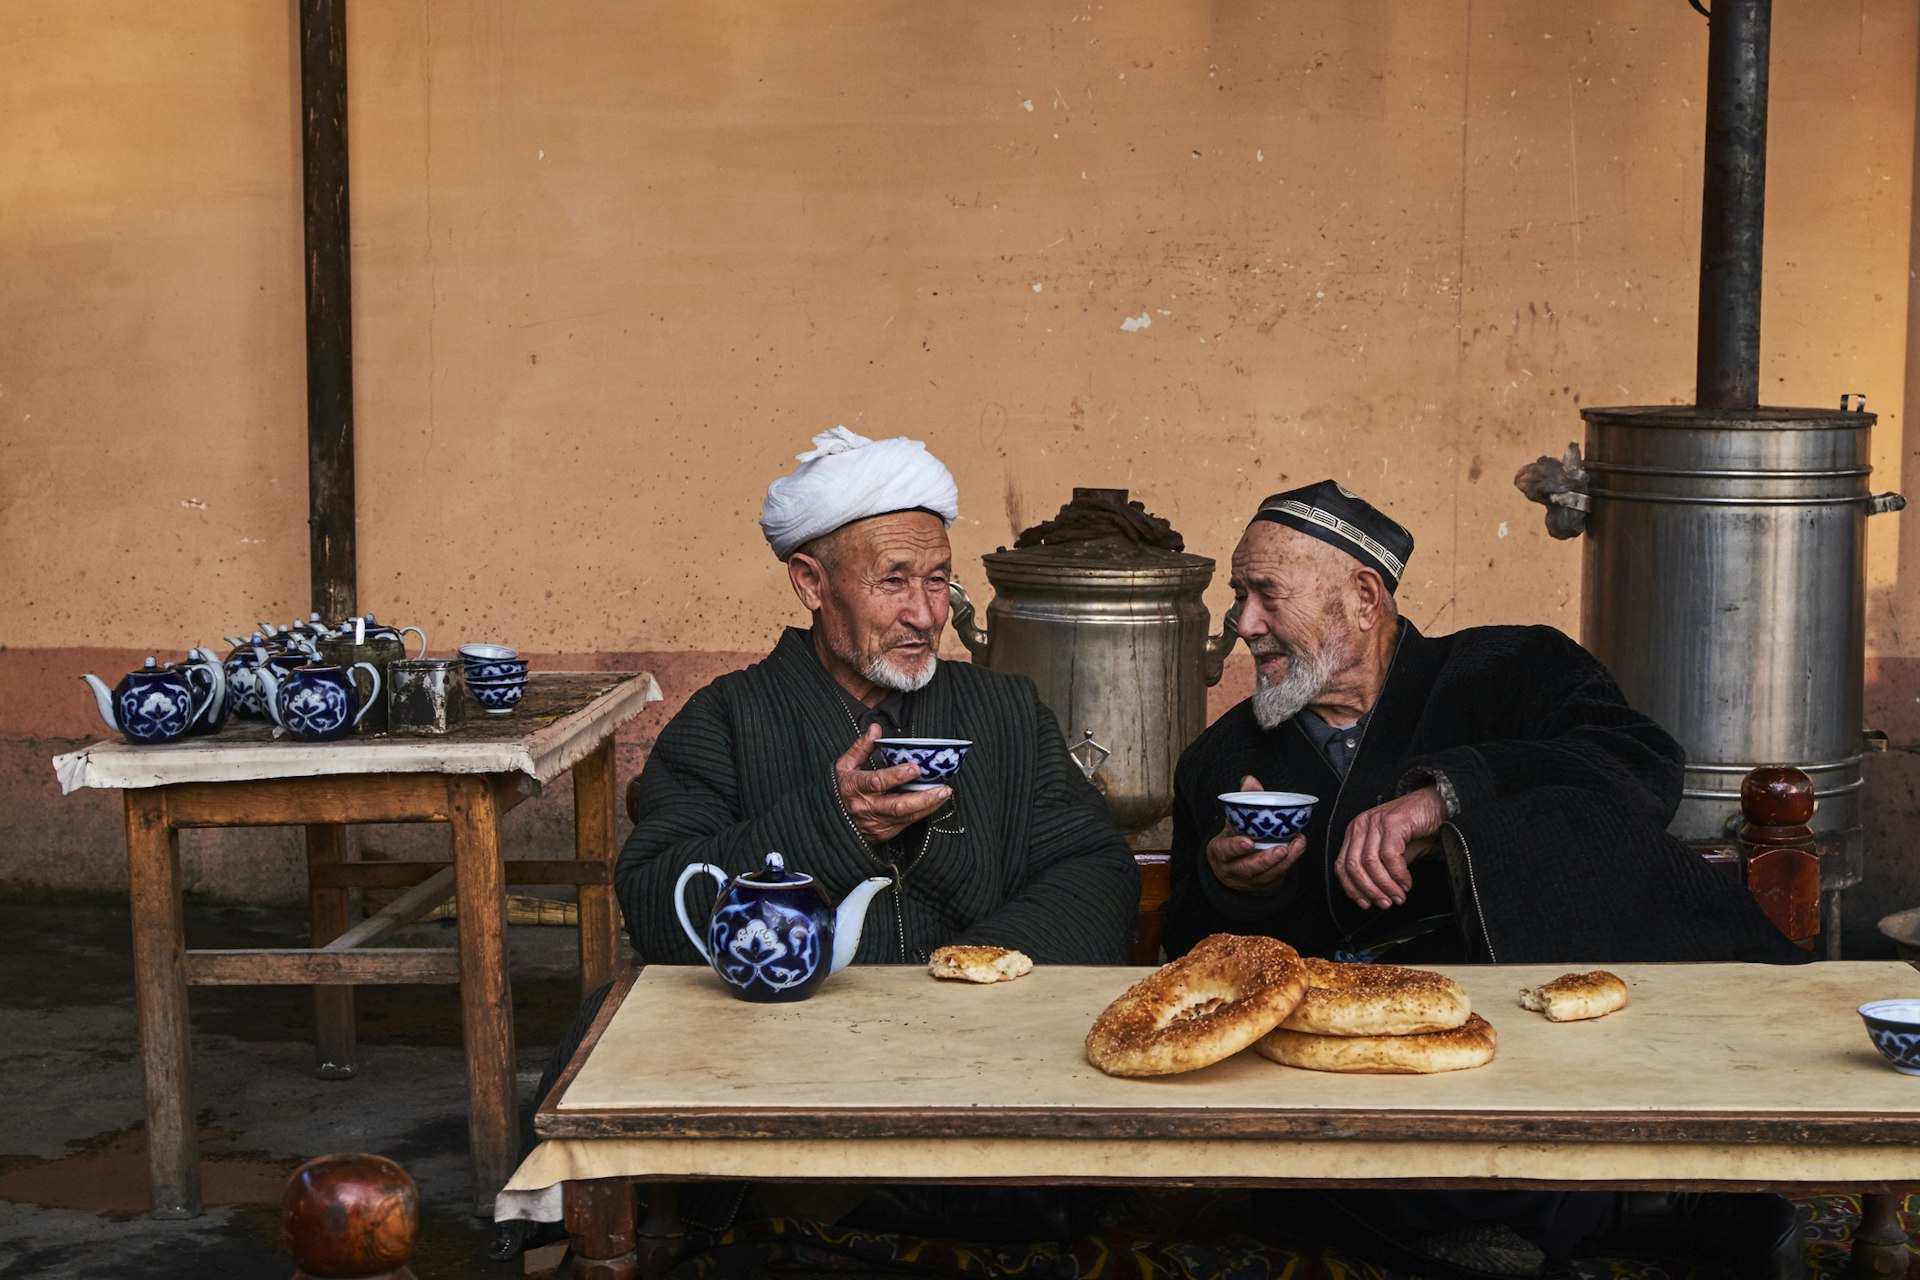 Two men in traditional Uzbek dress chat over tea and bread in a teahouse